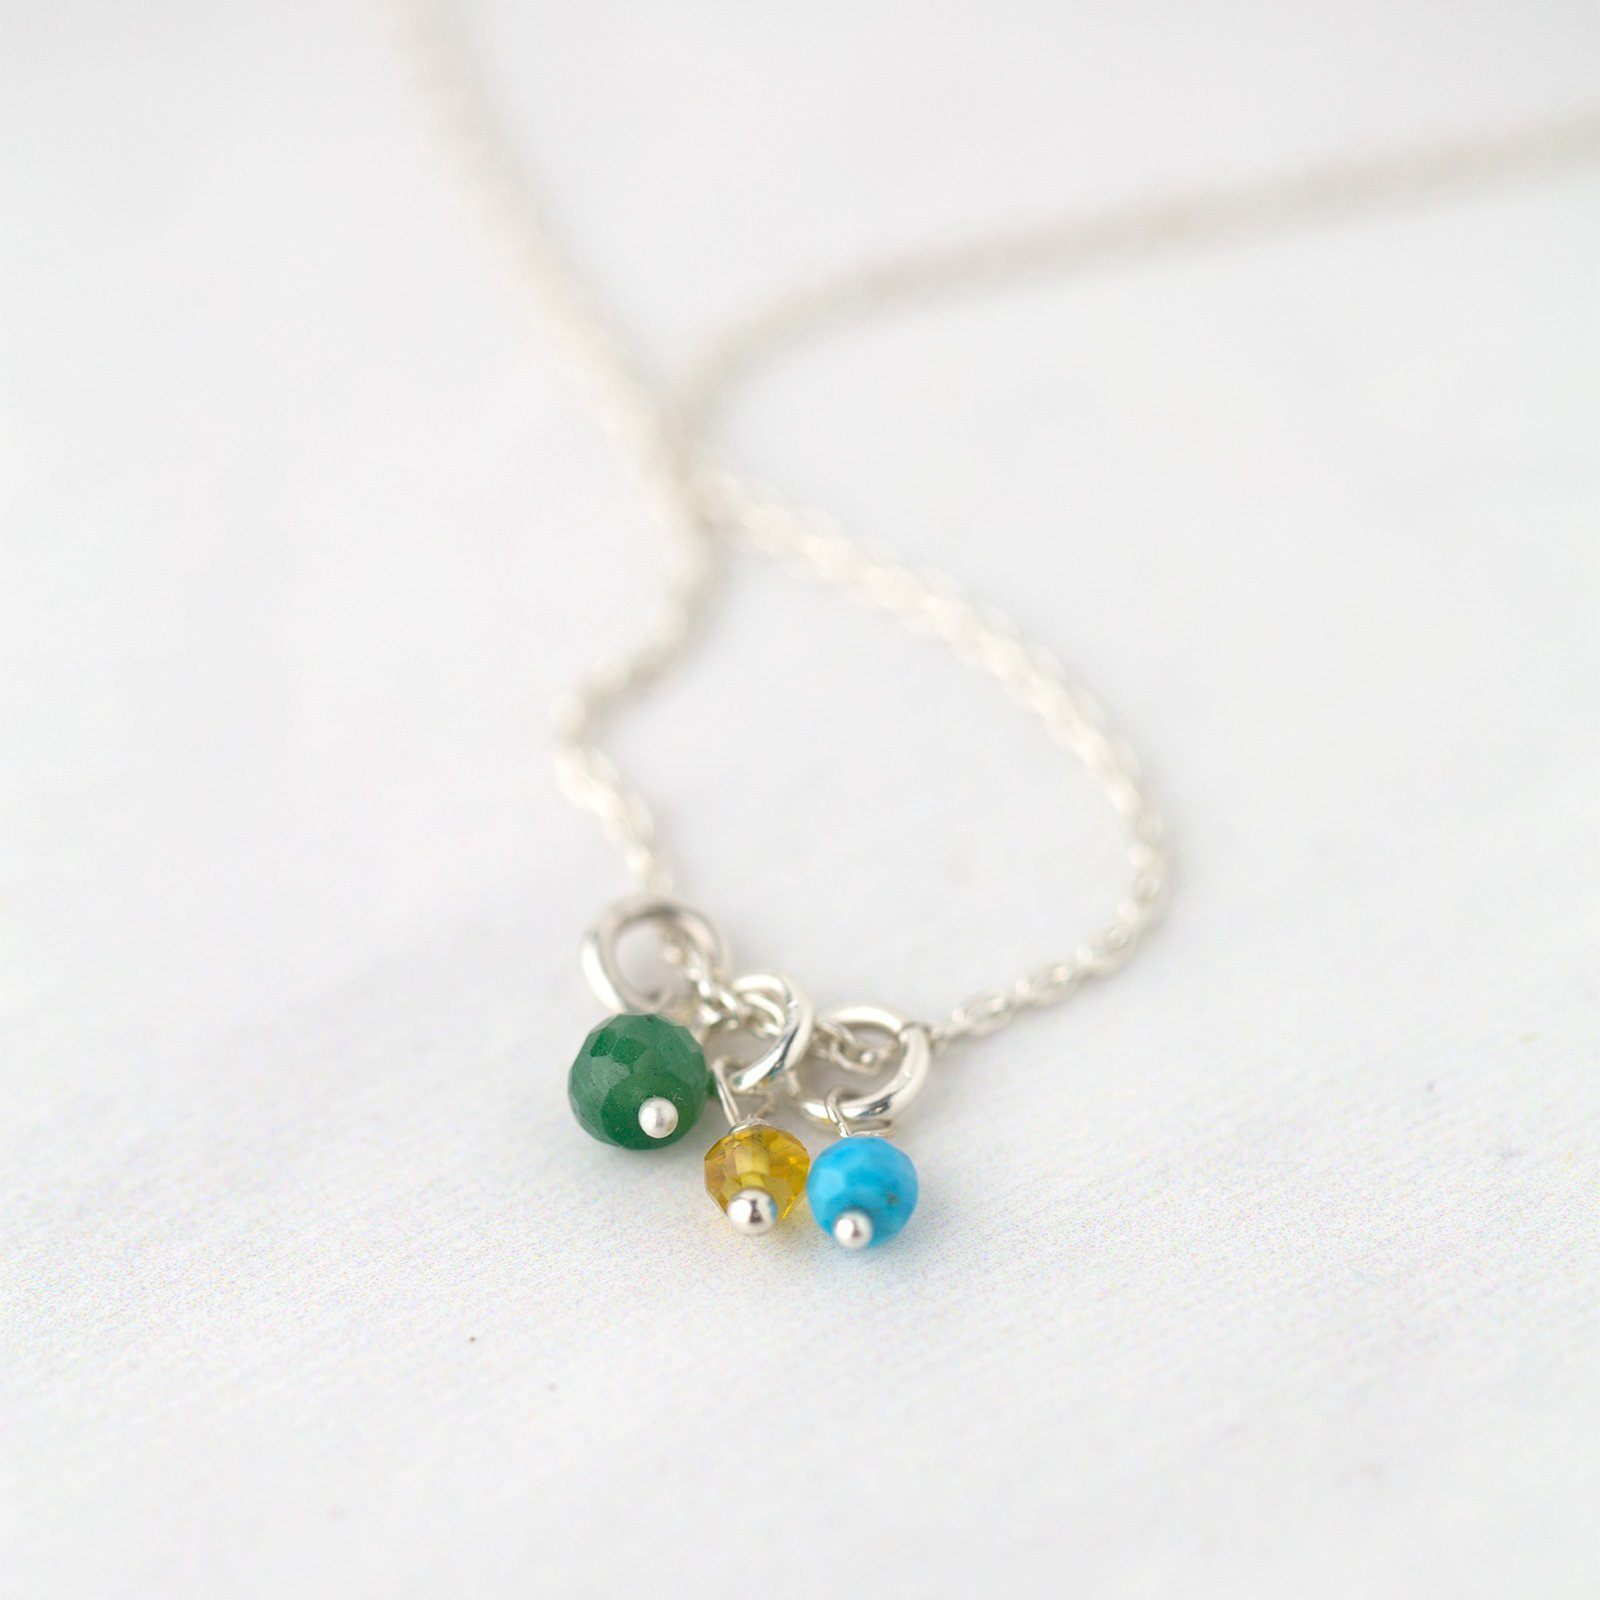 Dainty Birthstone Necklace - 1 or More Stones - Handmade Jewelry by Burnish